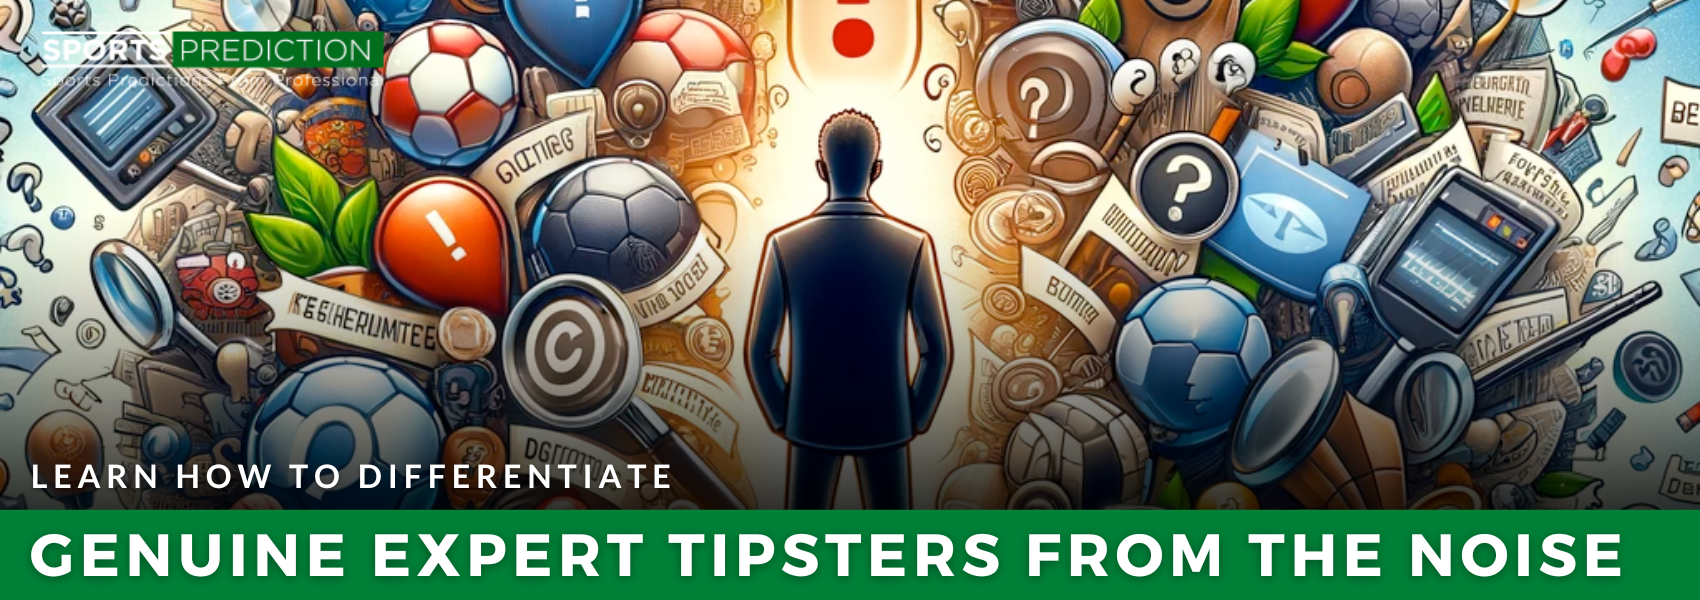 How To Differentiate Genuine Expert Tipsters From The Noise